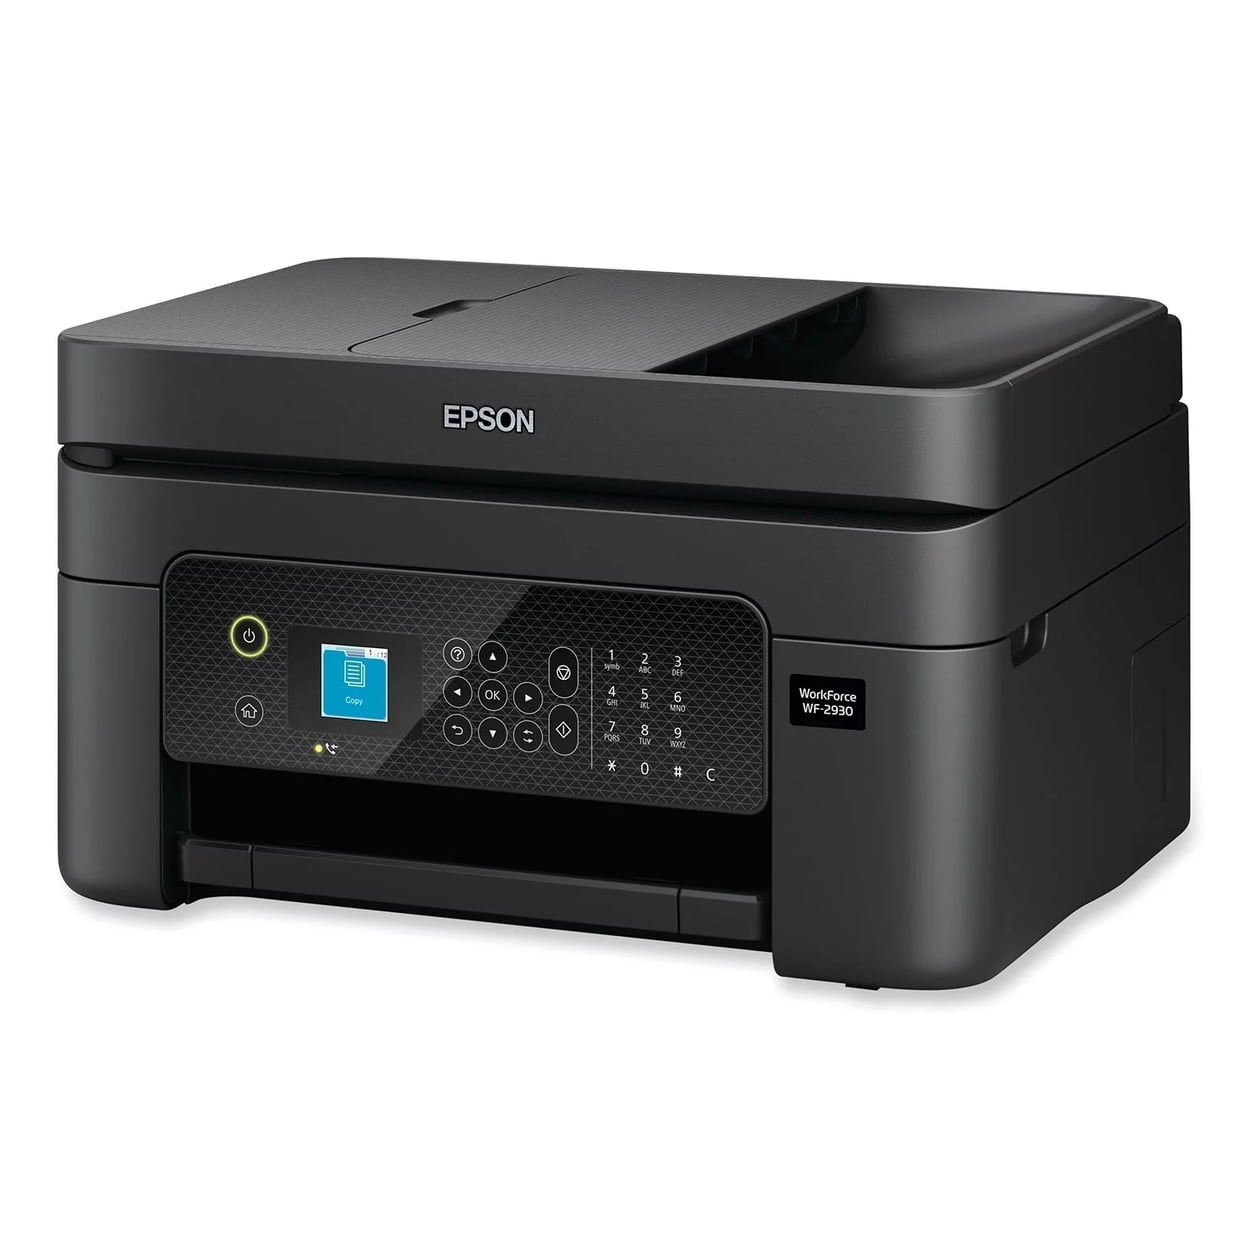 Epson WorkForce WF-2930 All-in-One Printer, Copy/Fax/Print/Scan